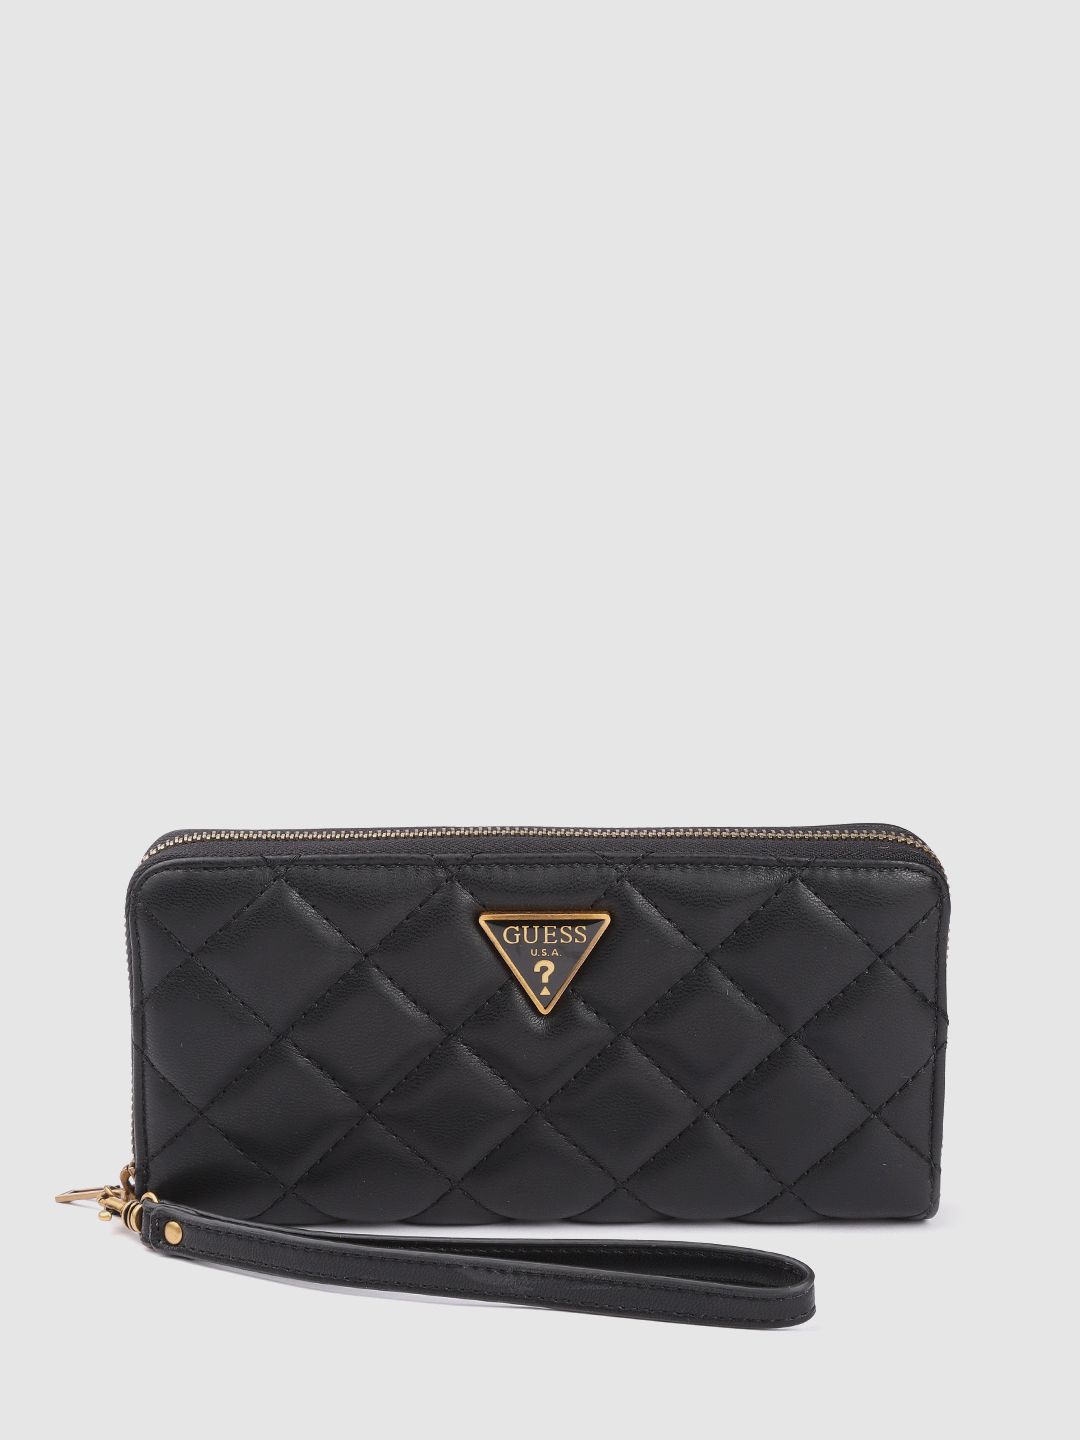 GUESS Women Black Quilted PU Zip Around Wallet Price in India